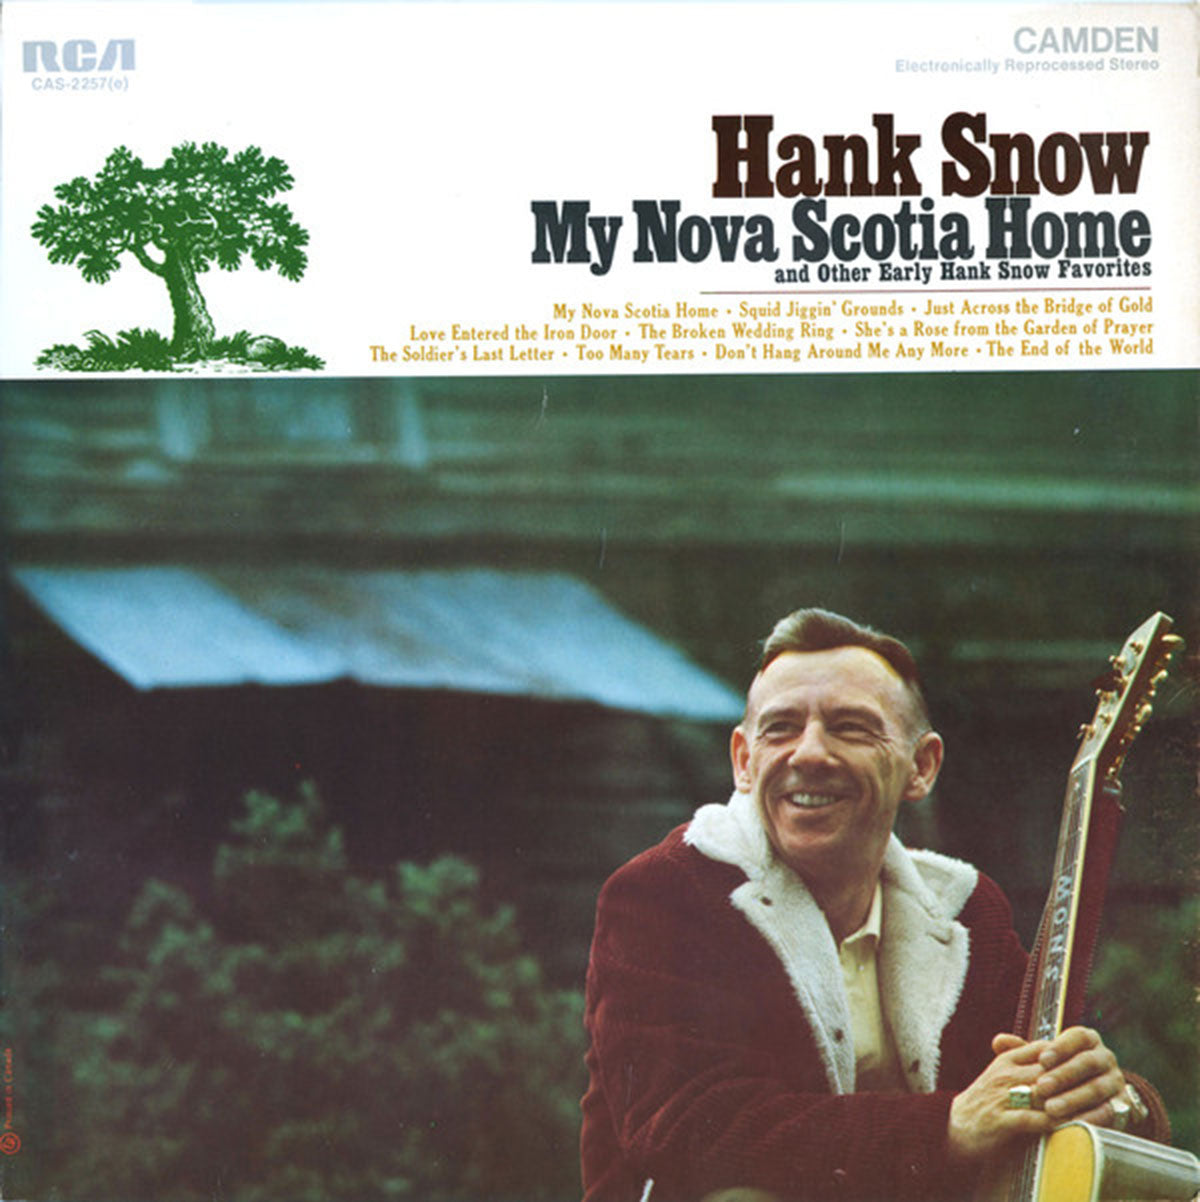 Hank Snow – My Nova Scotia Home And Other Early Hank Snow Favorites